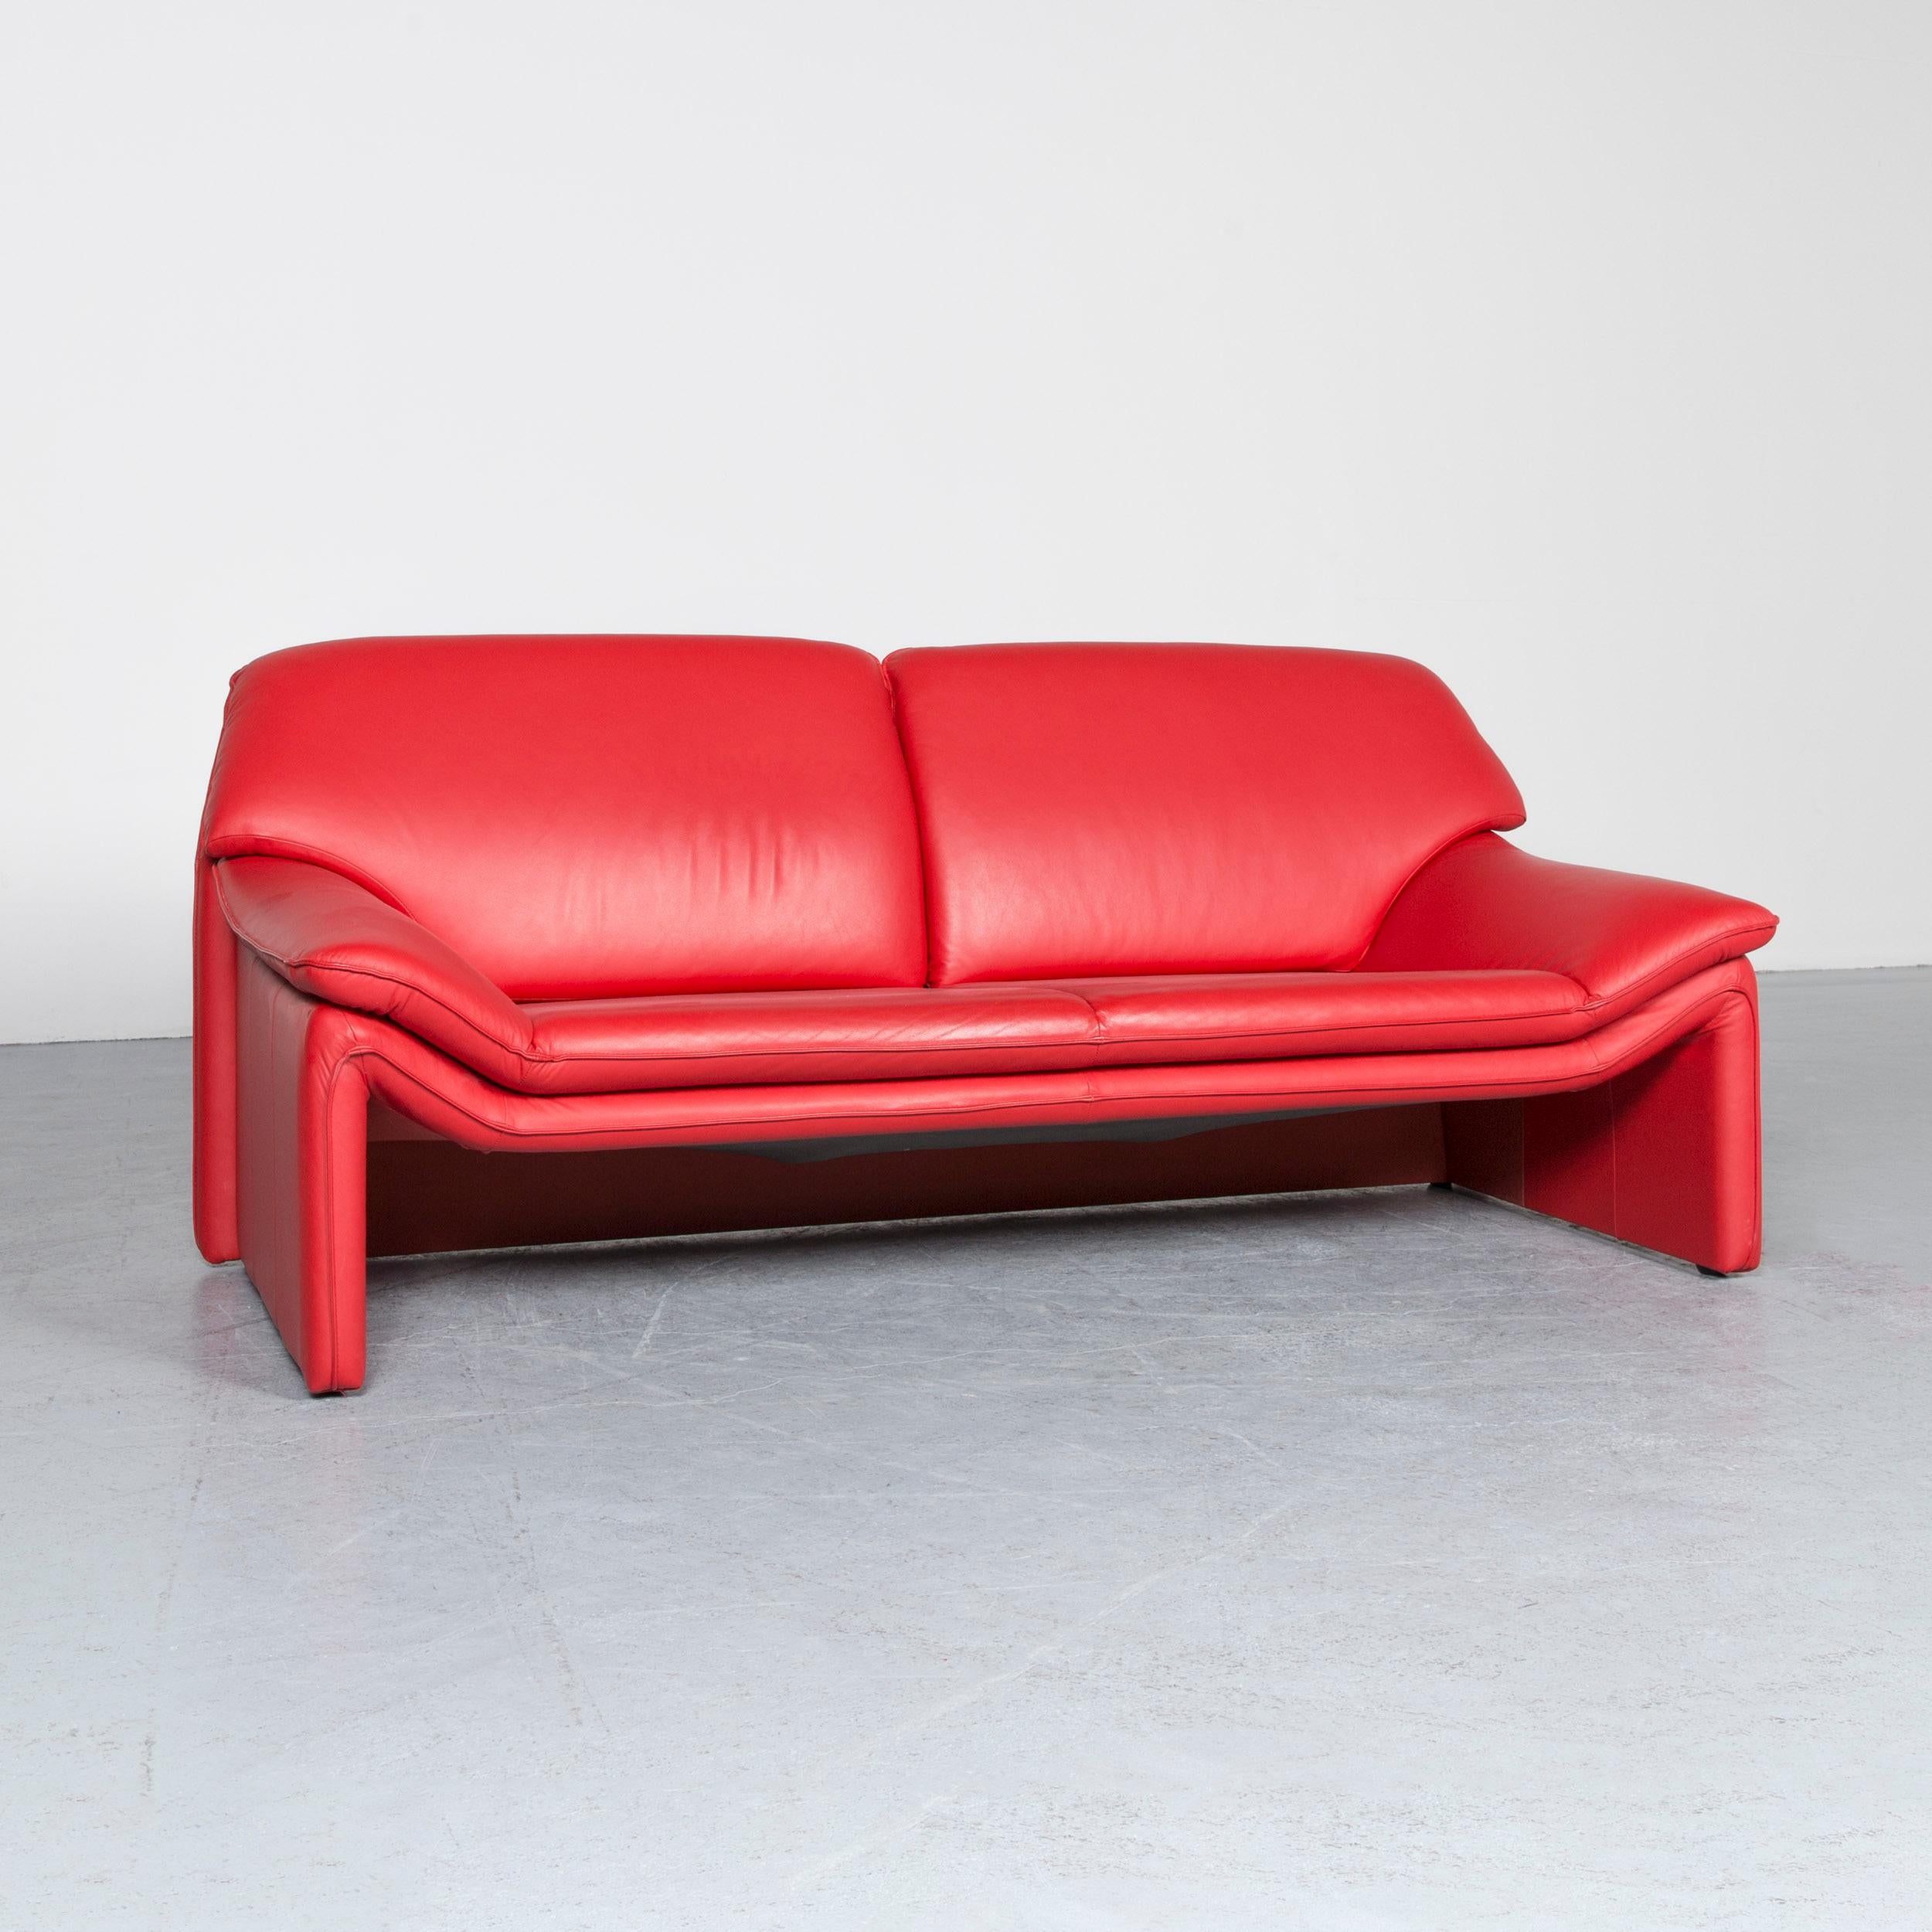 We bring to you a Laauser Atlanta designer sofa leather red two-seat couch modern.